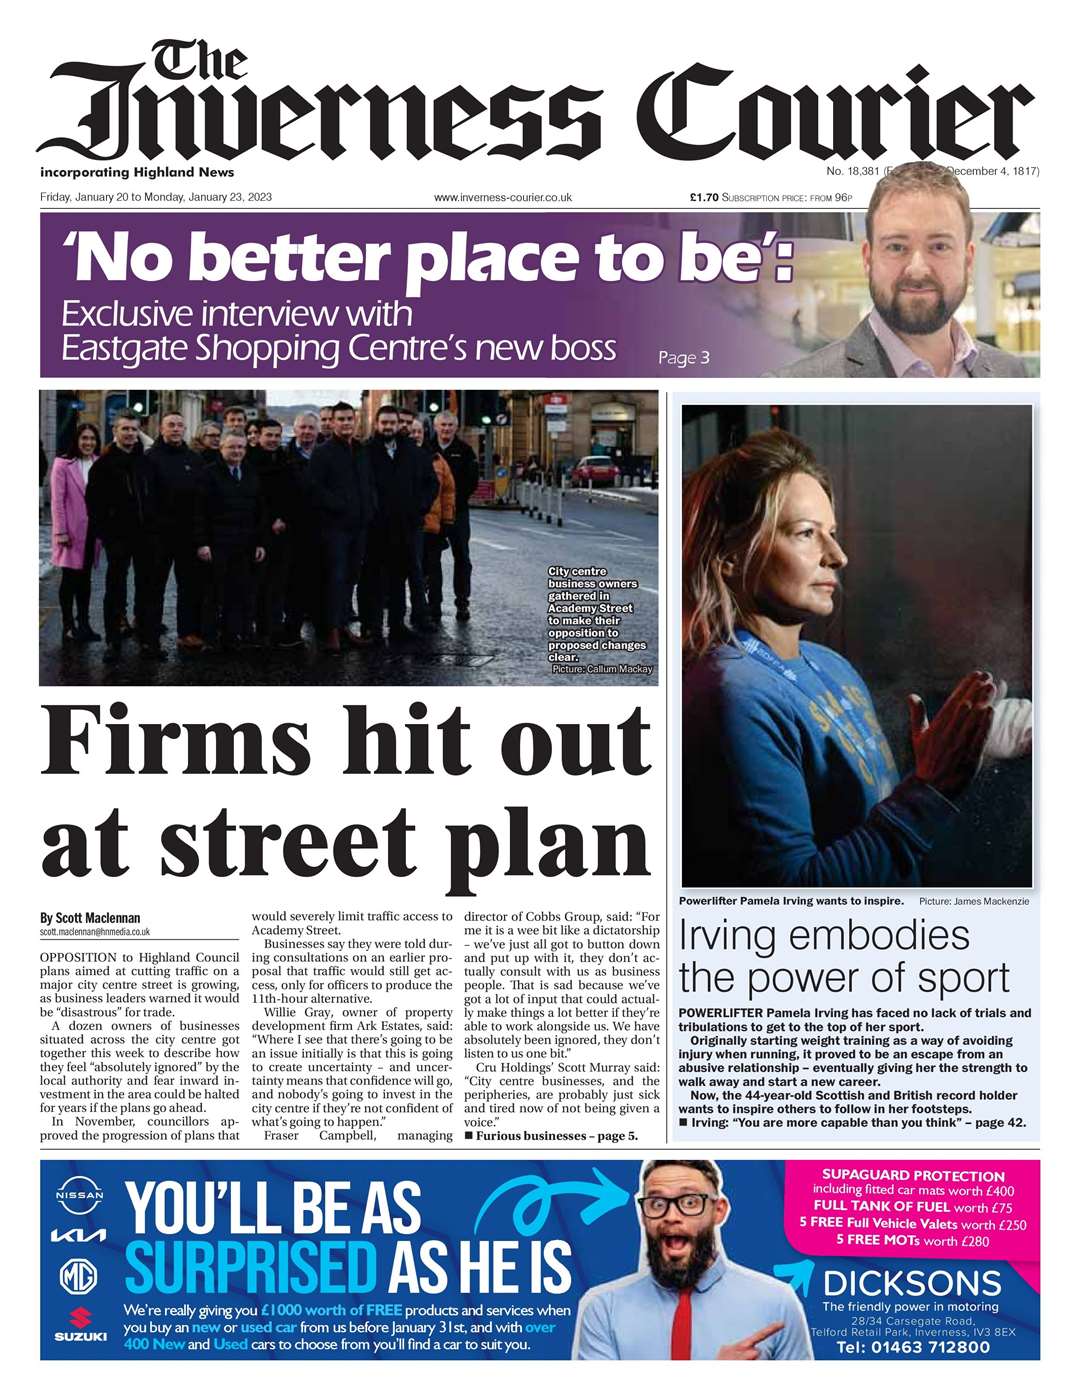 The Inverness Courier, January 20, front page.